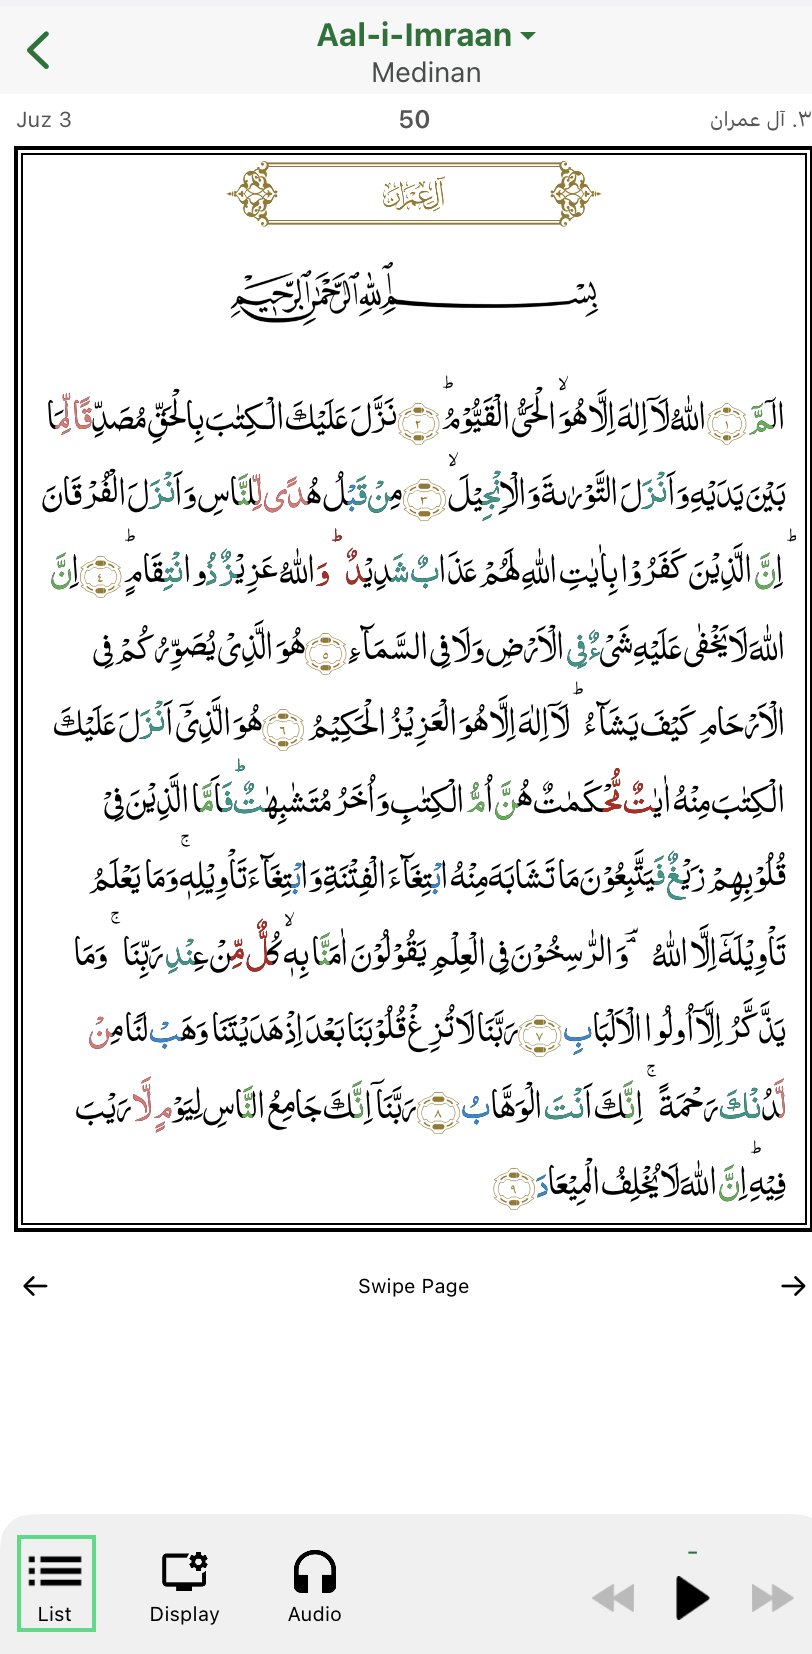 IOS_surah_page_view.png